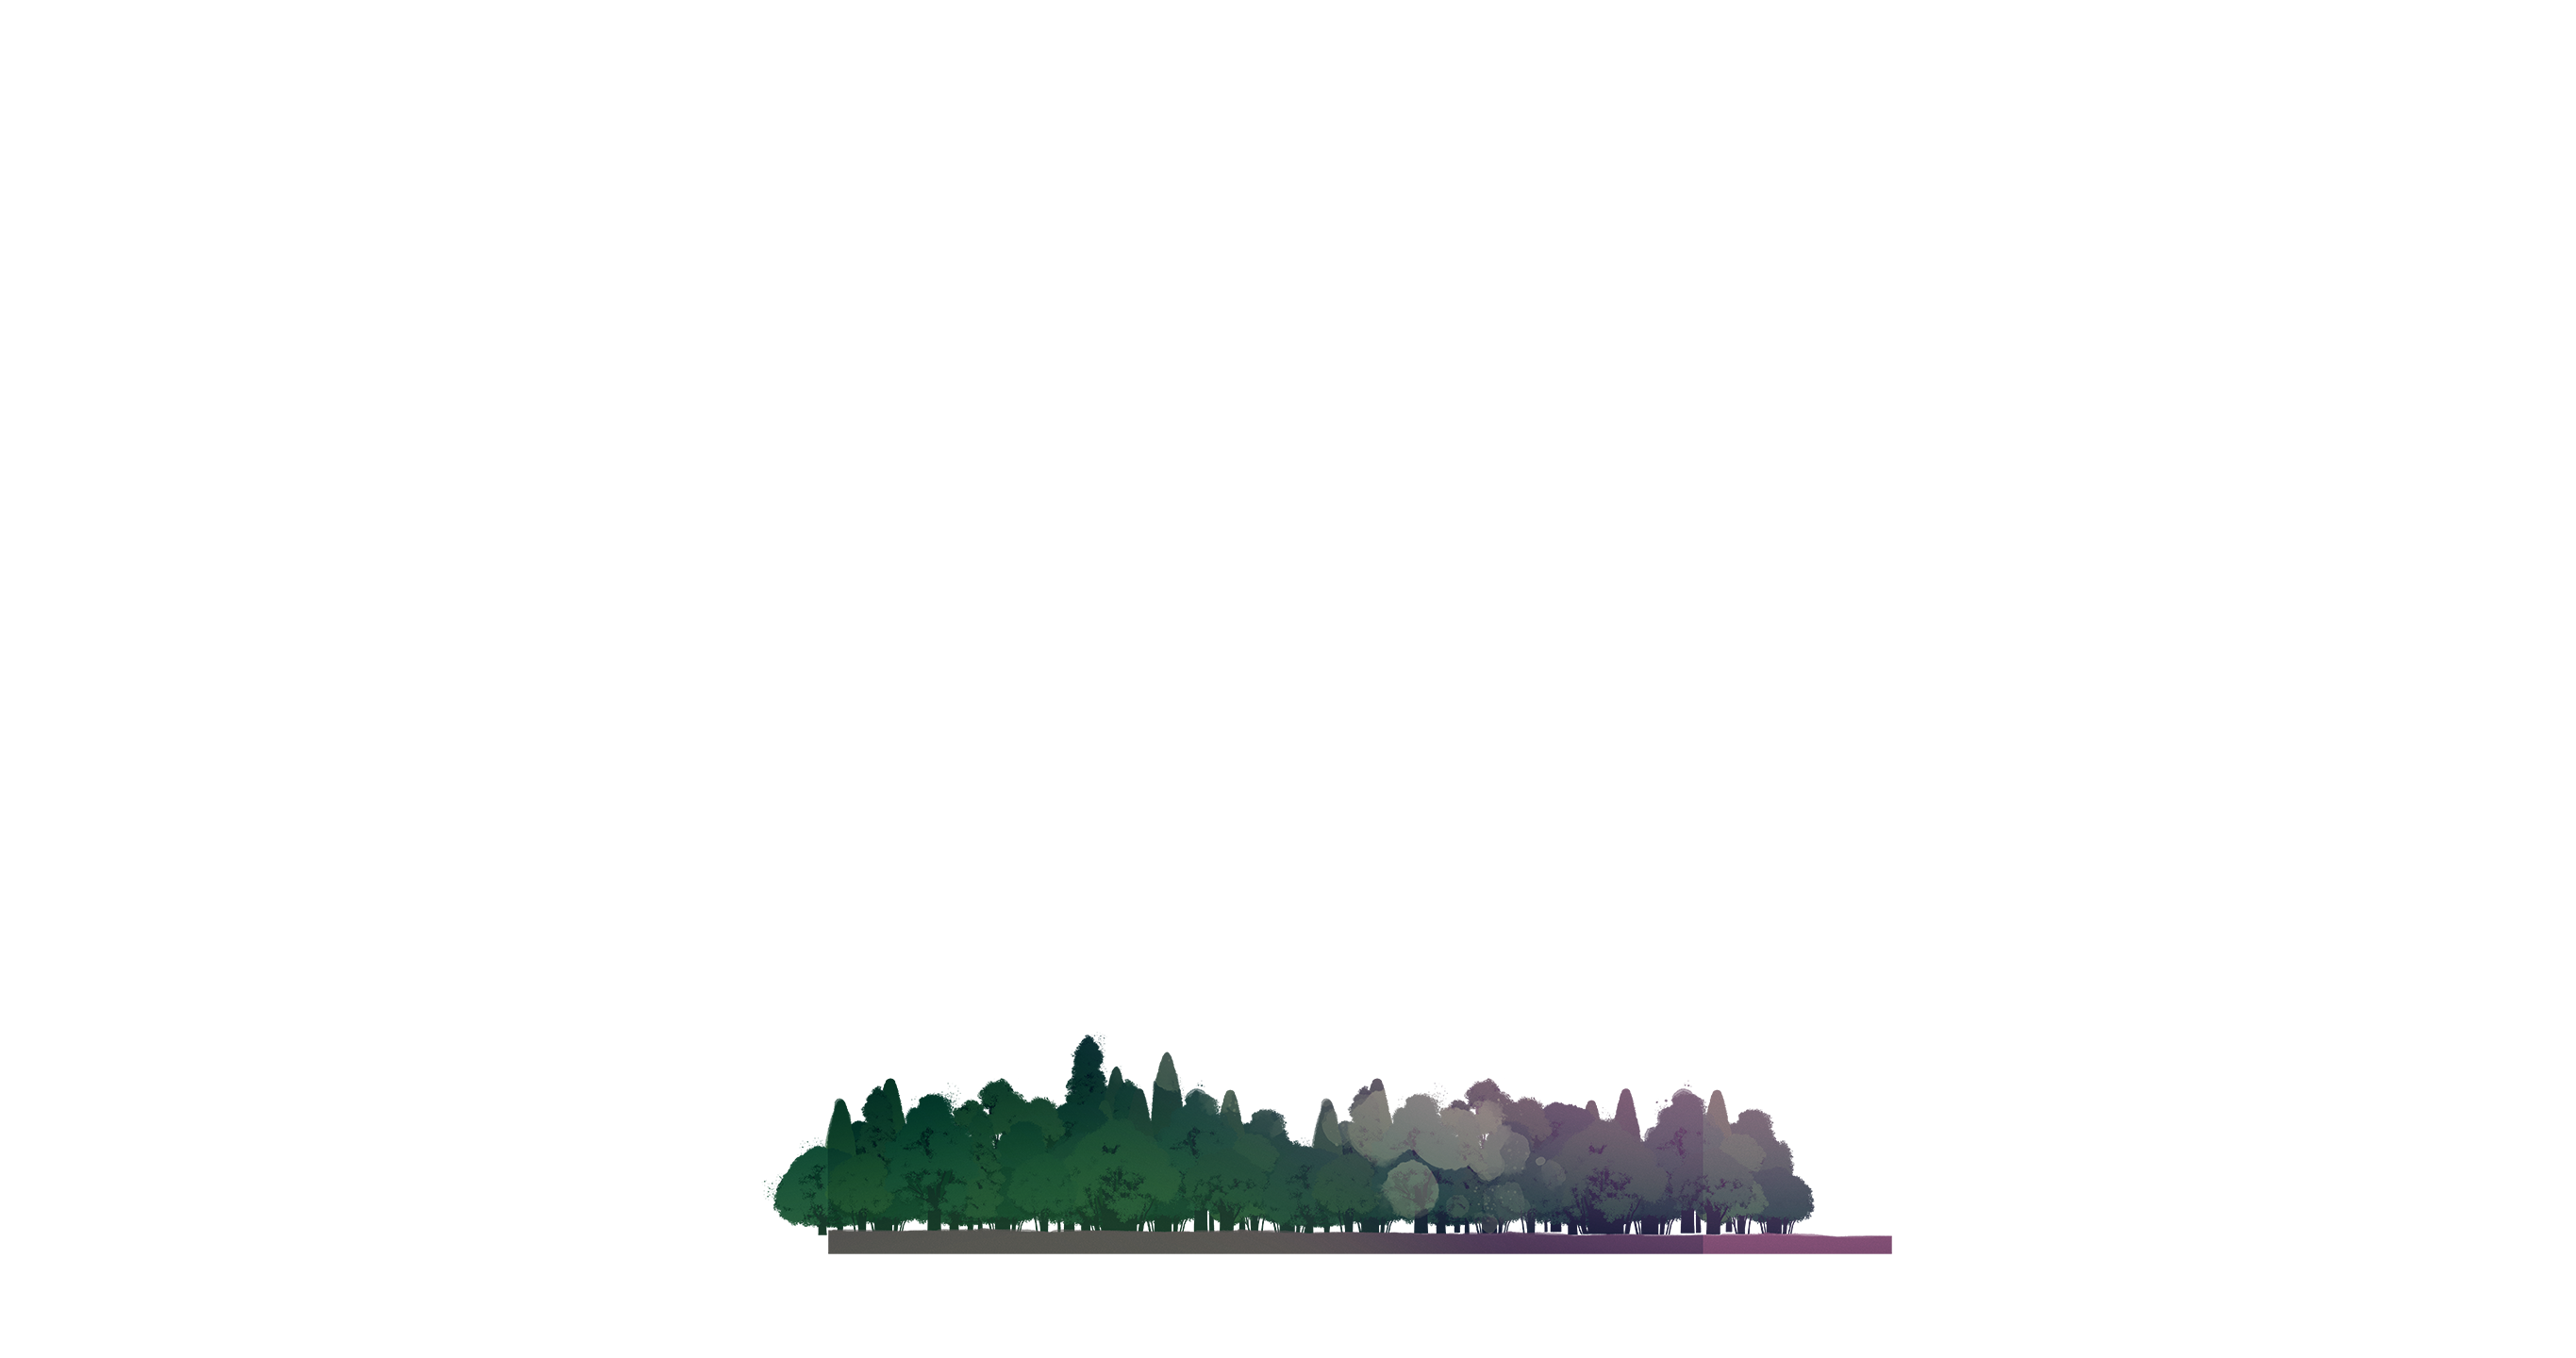 Background image displaying trees in the distance